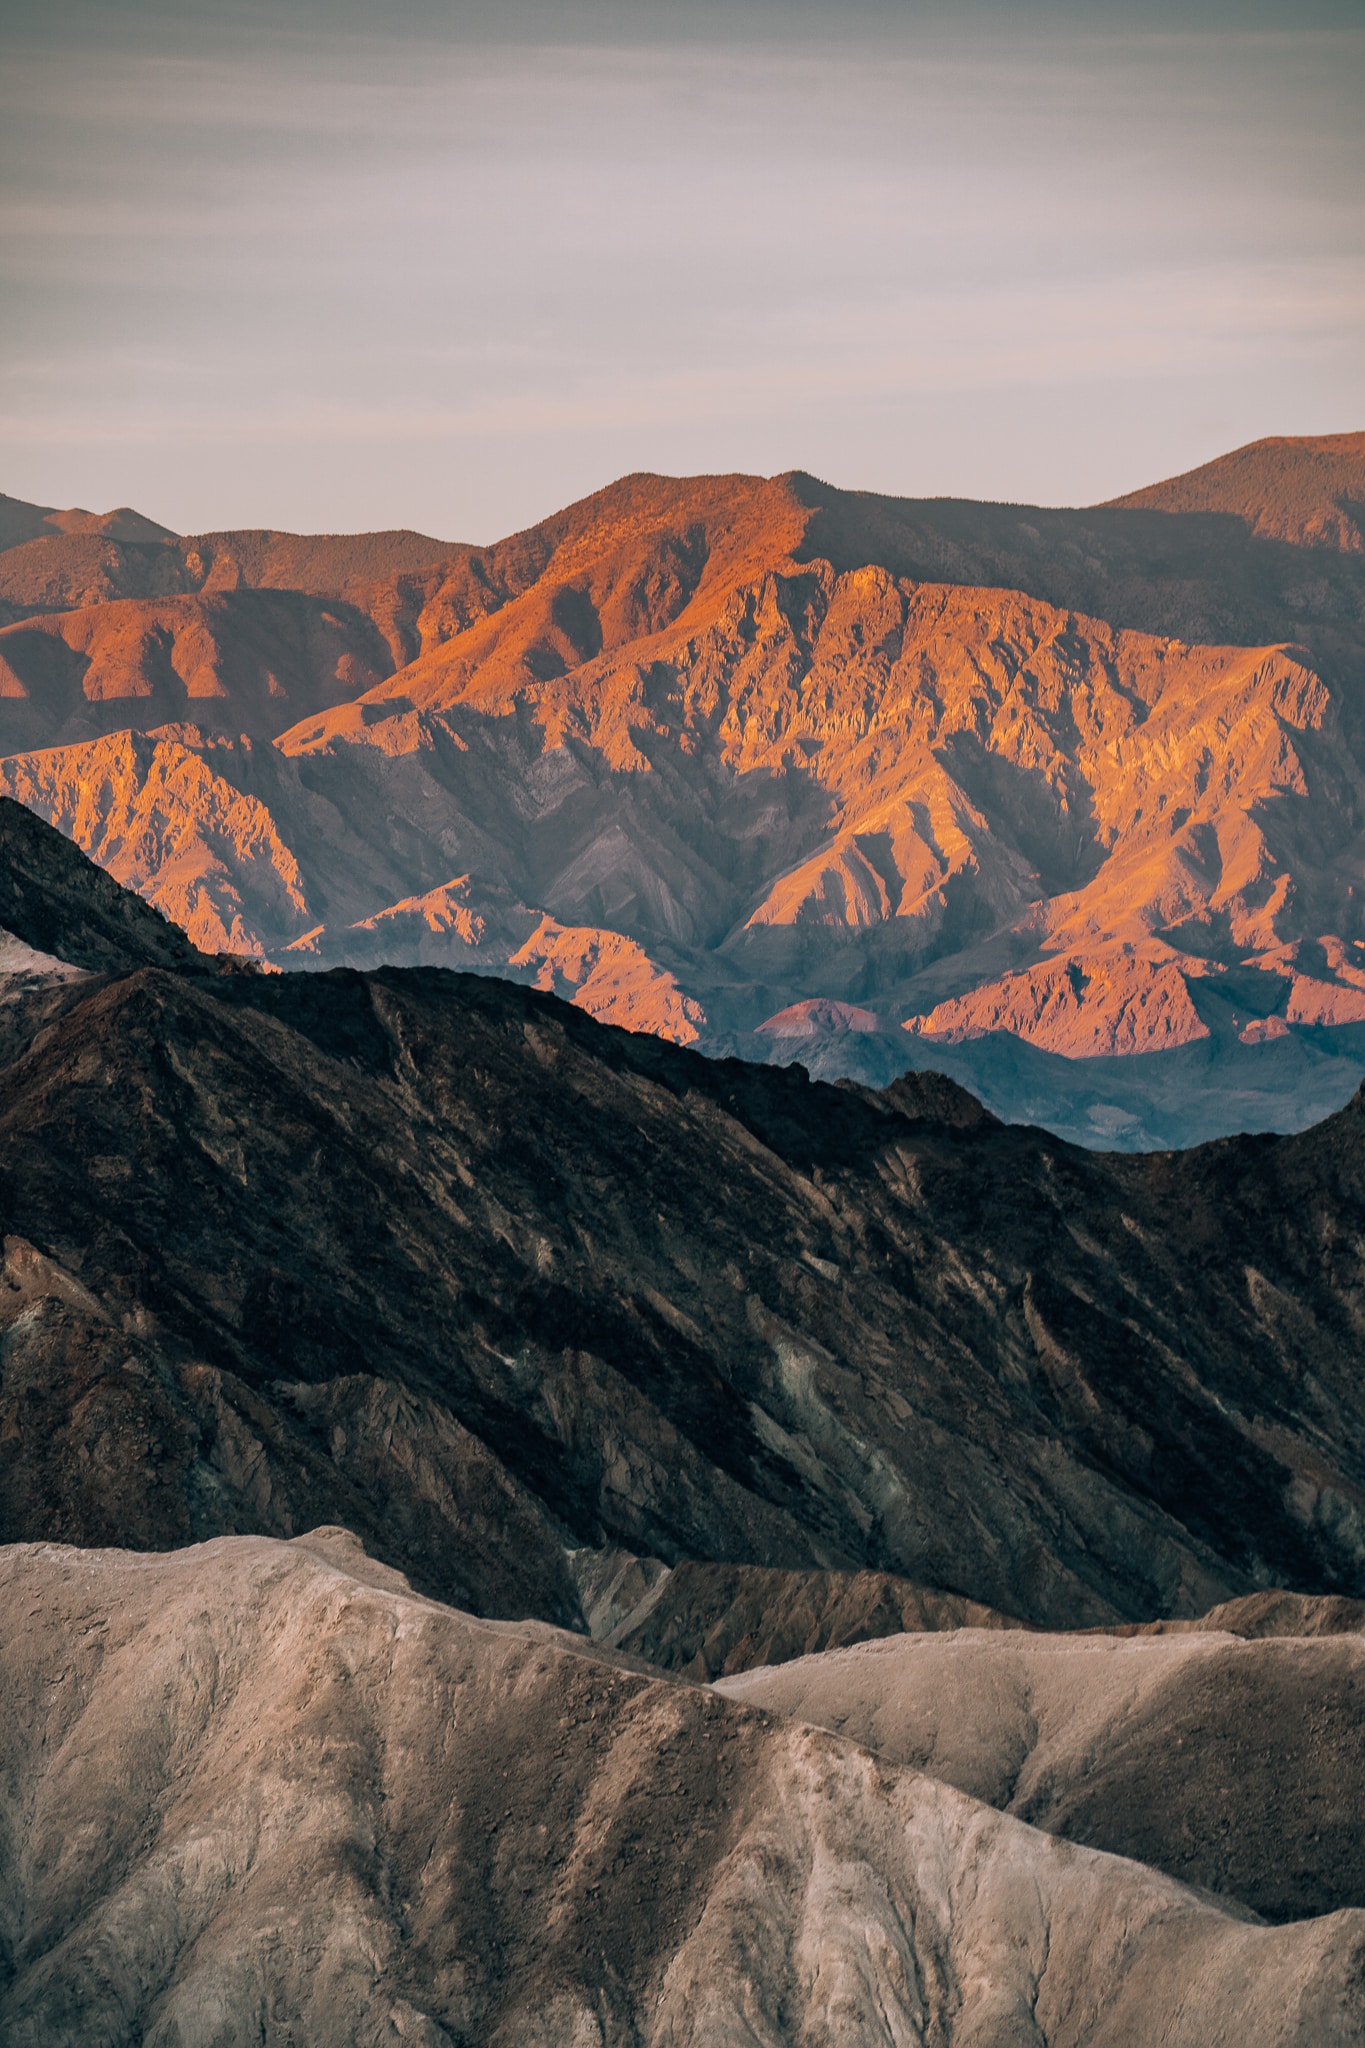 Mountain layers showing colors during sunrise at Zabrinskie Point in Death Valley National Park